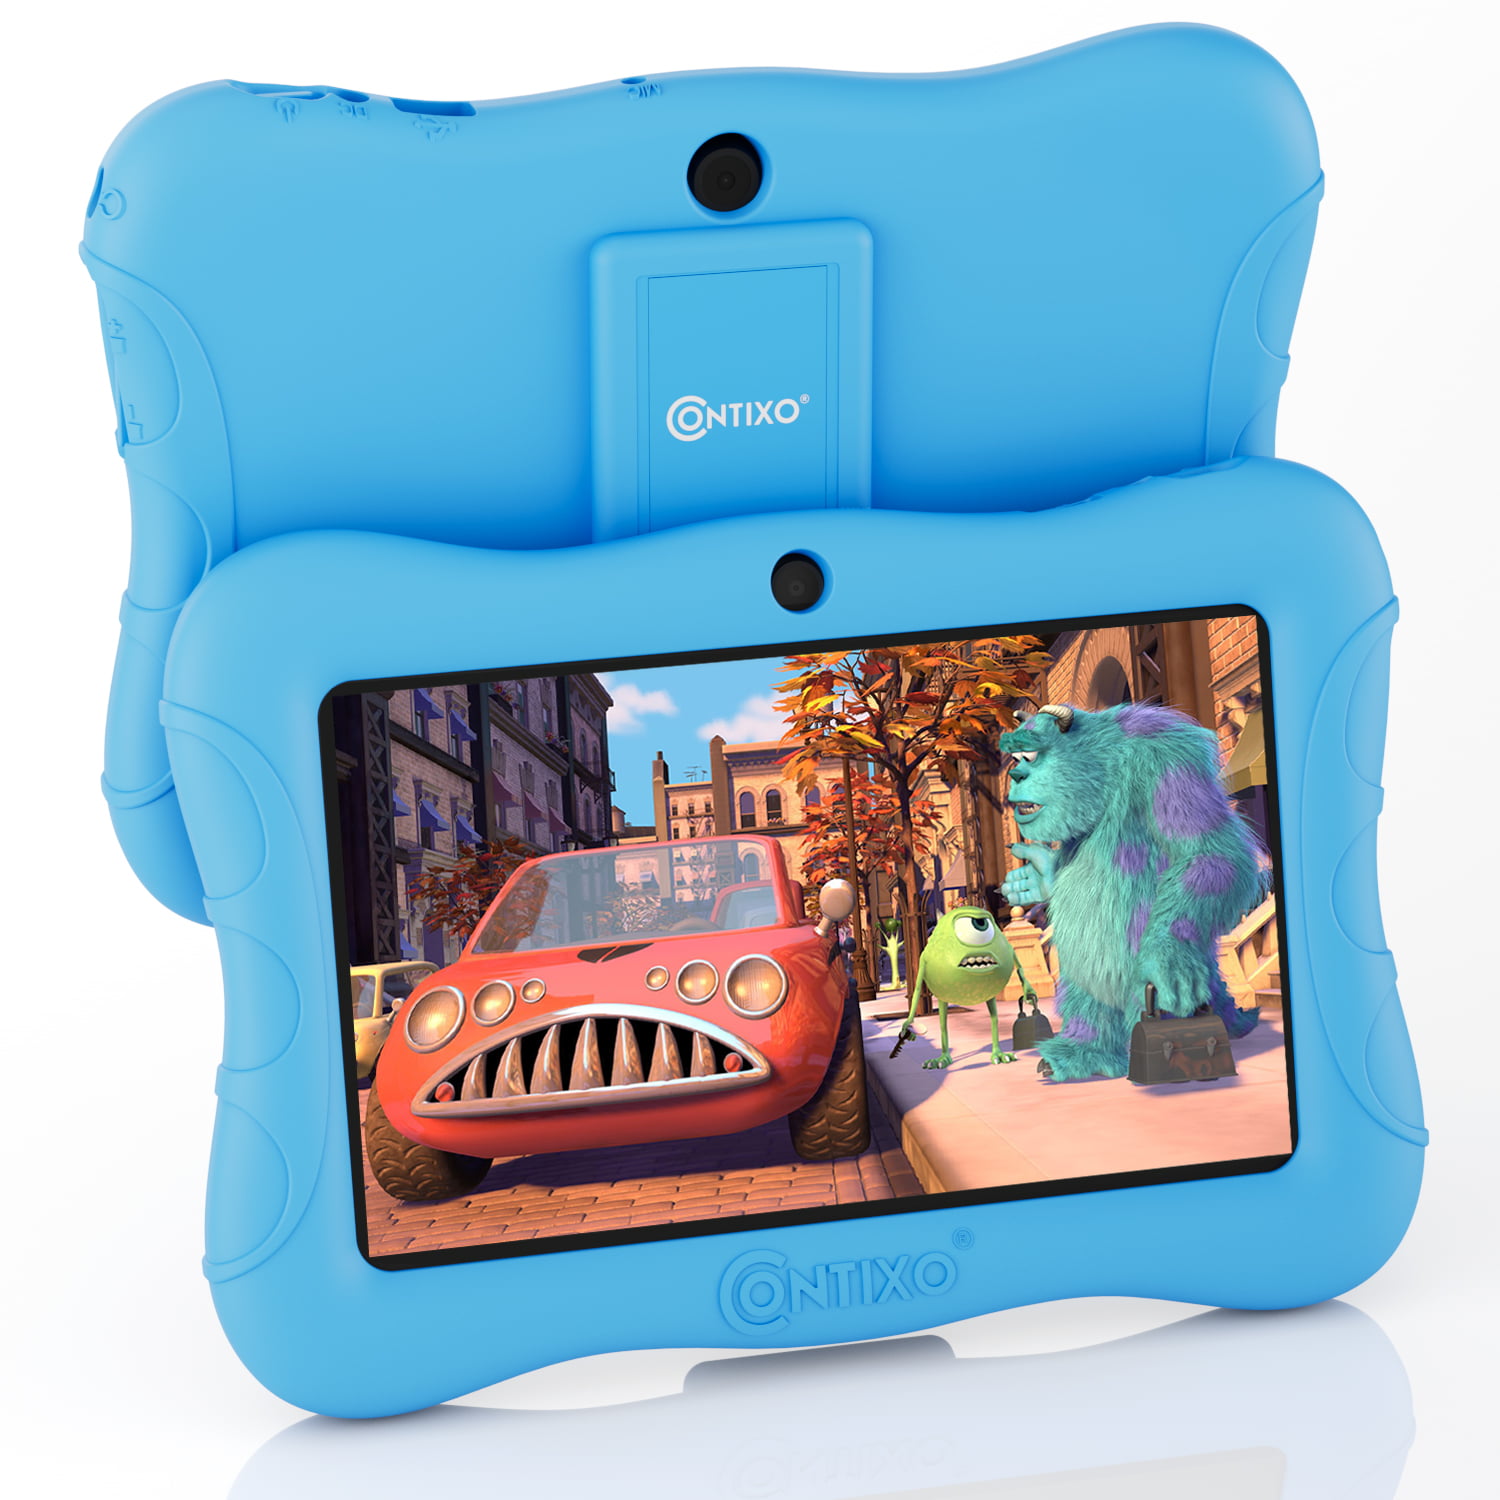 Contixo Kids Tablet with over $150 value of pre-installed Teacher Approved Apps, Android, 7", 32GB Storage, Learning Tablet with Parental Control, Kid-Proof Protective Case, age 3-8, V9-3-32-Blue